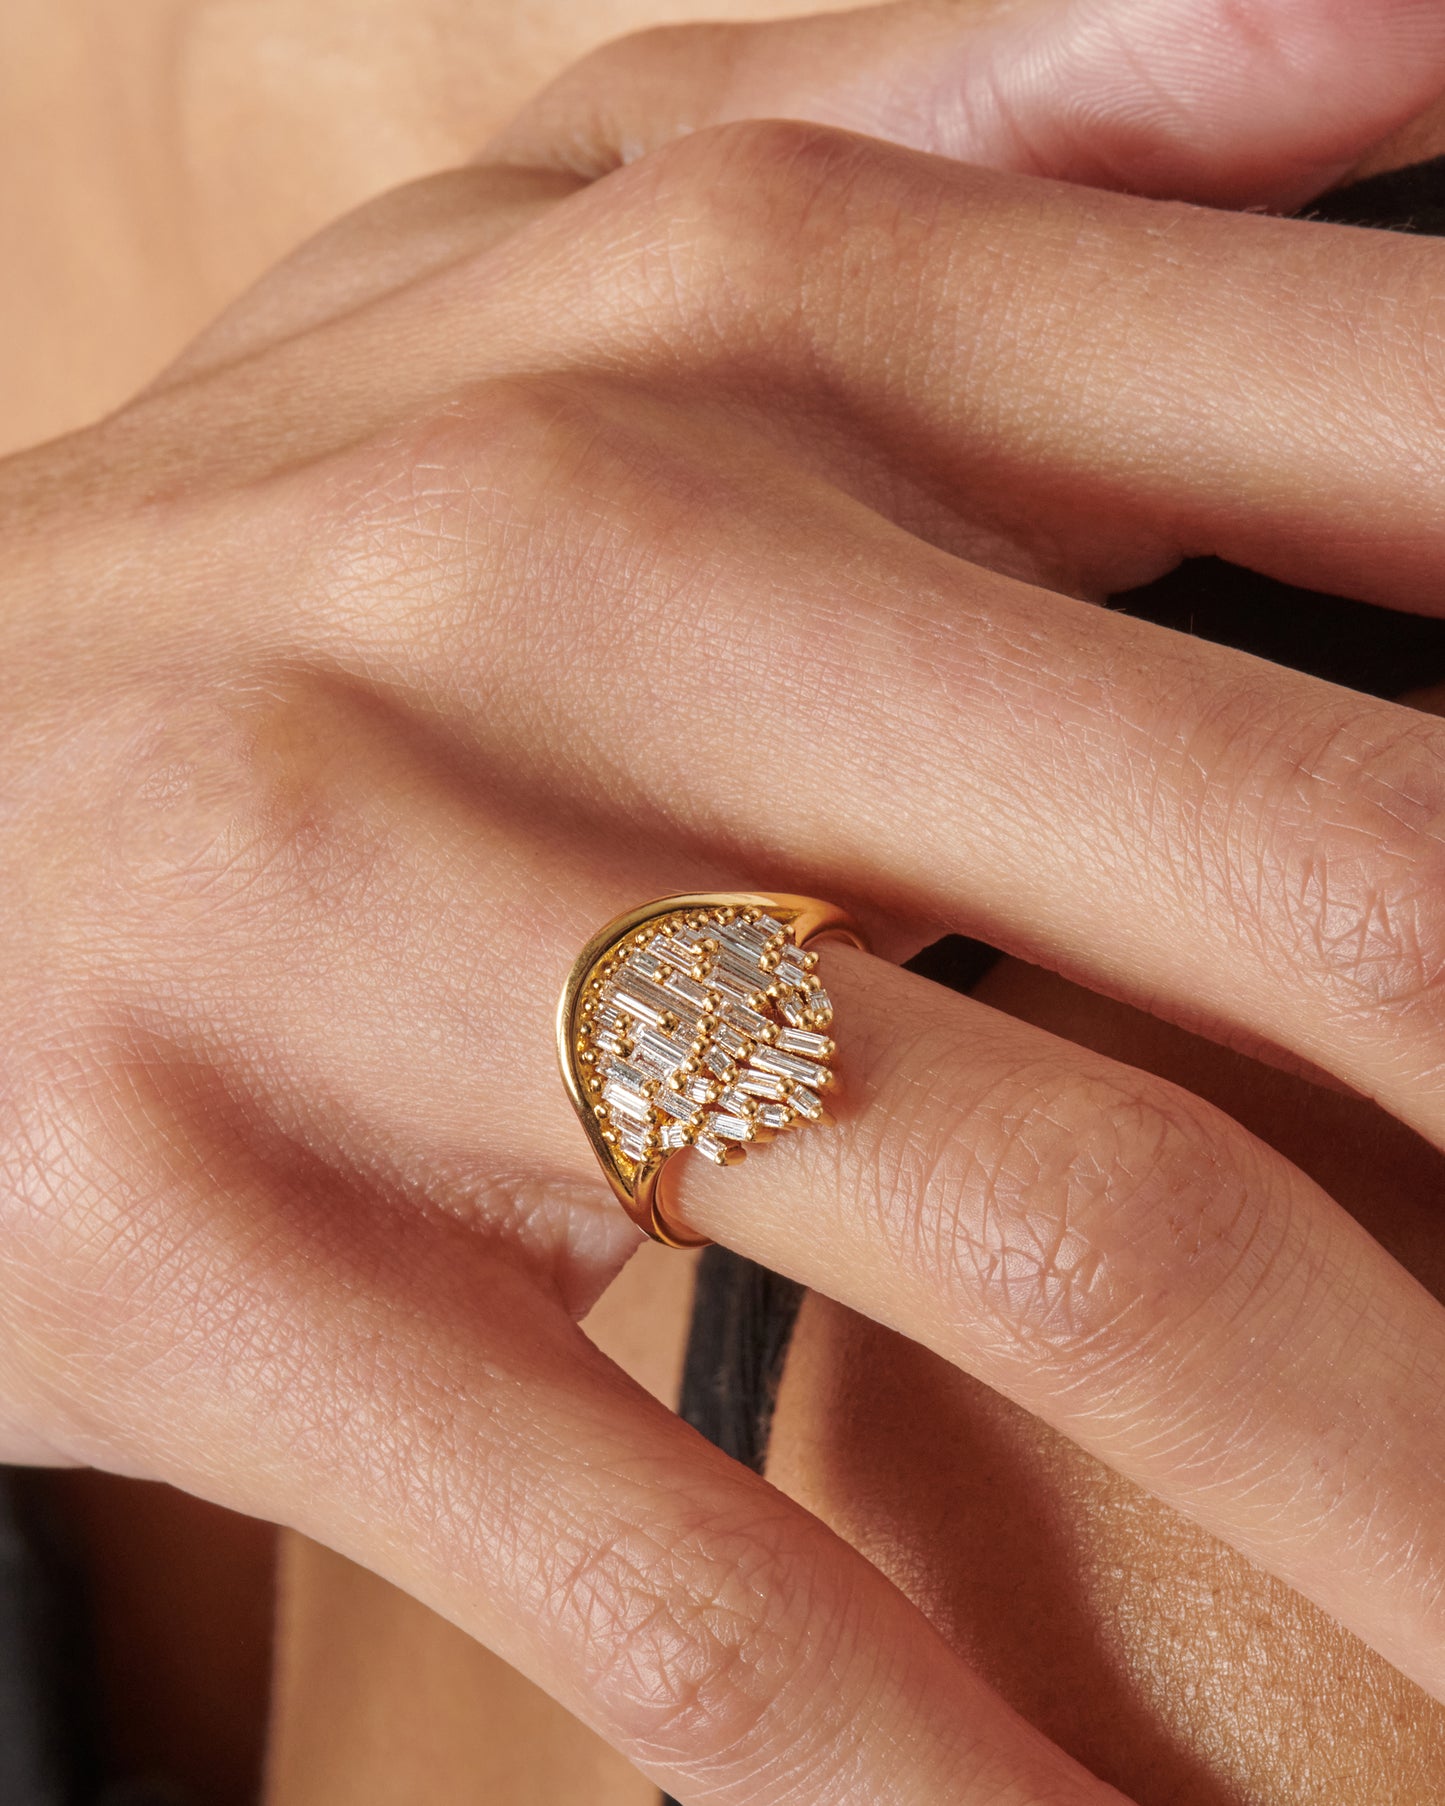 A semi-circular ring filled with diamond baguettes that grow slightly askew.